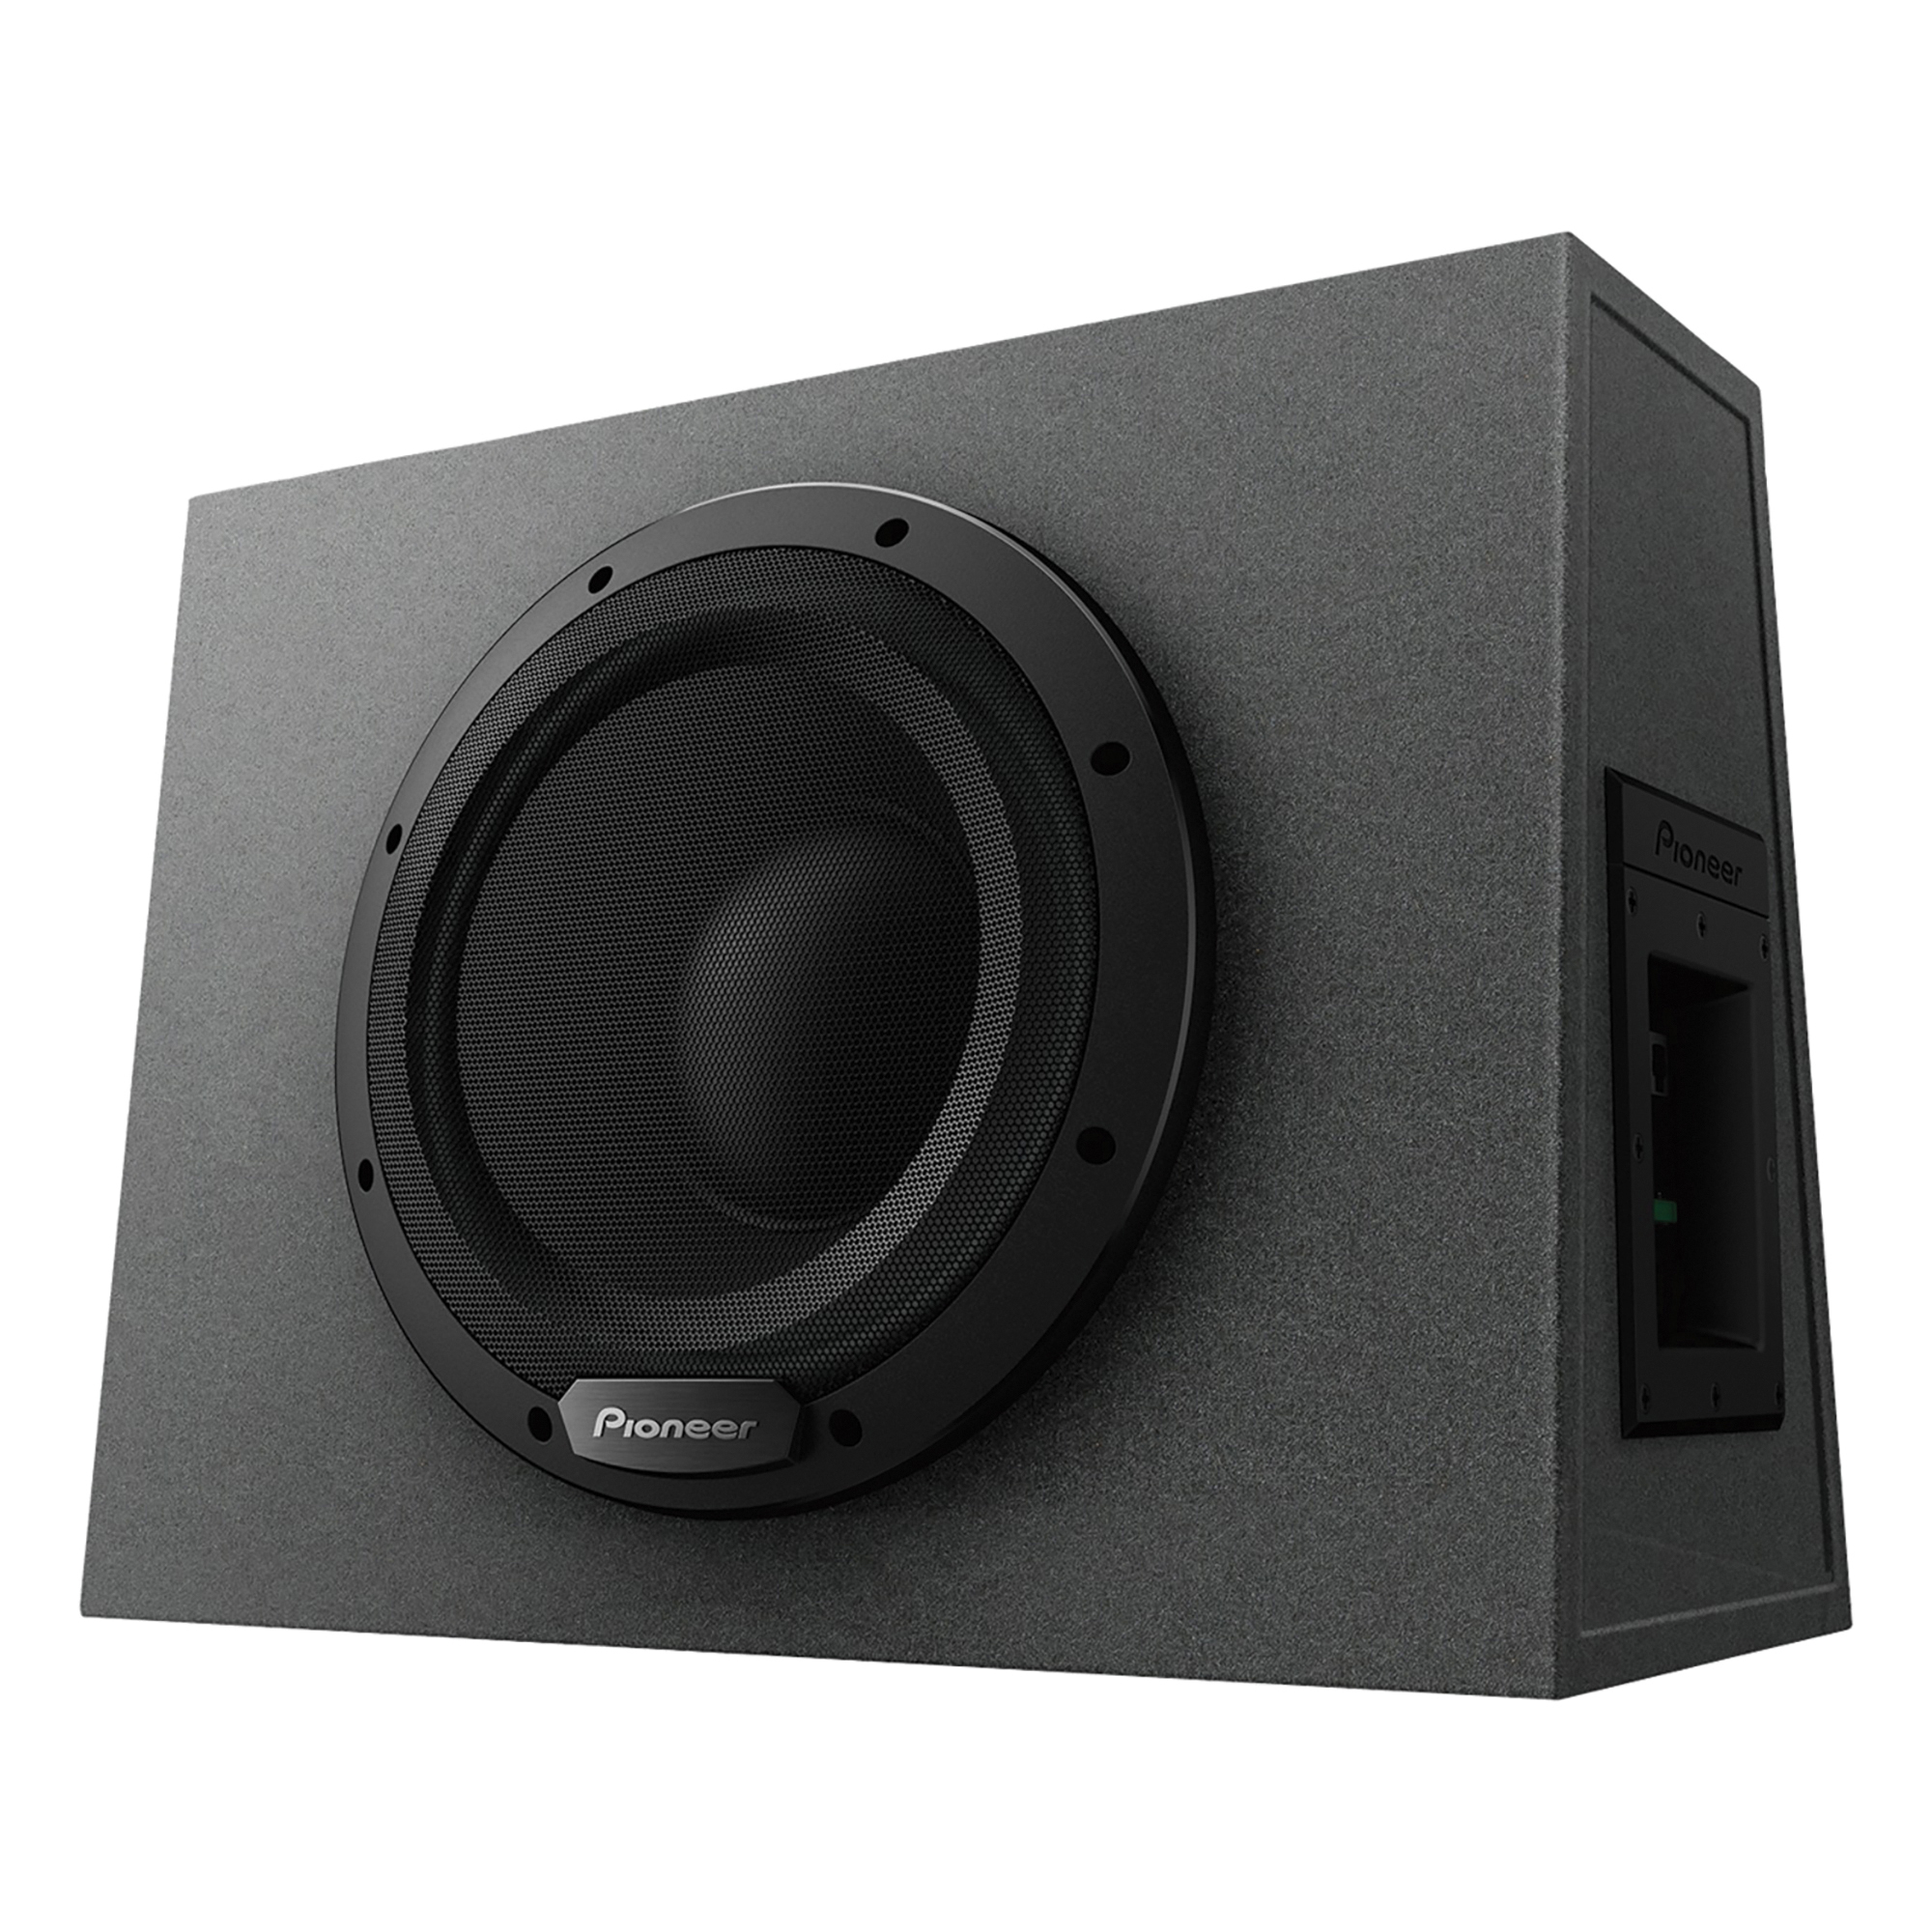 Pioneer, Sealed Subwoofer with Built-in Amp Bass Control, Model TS-WX1010A